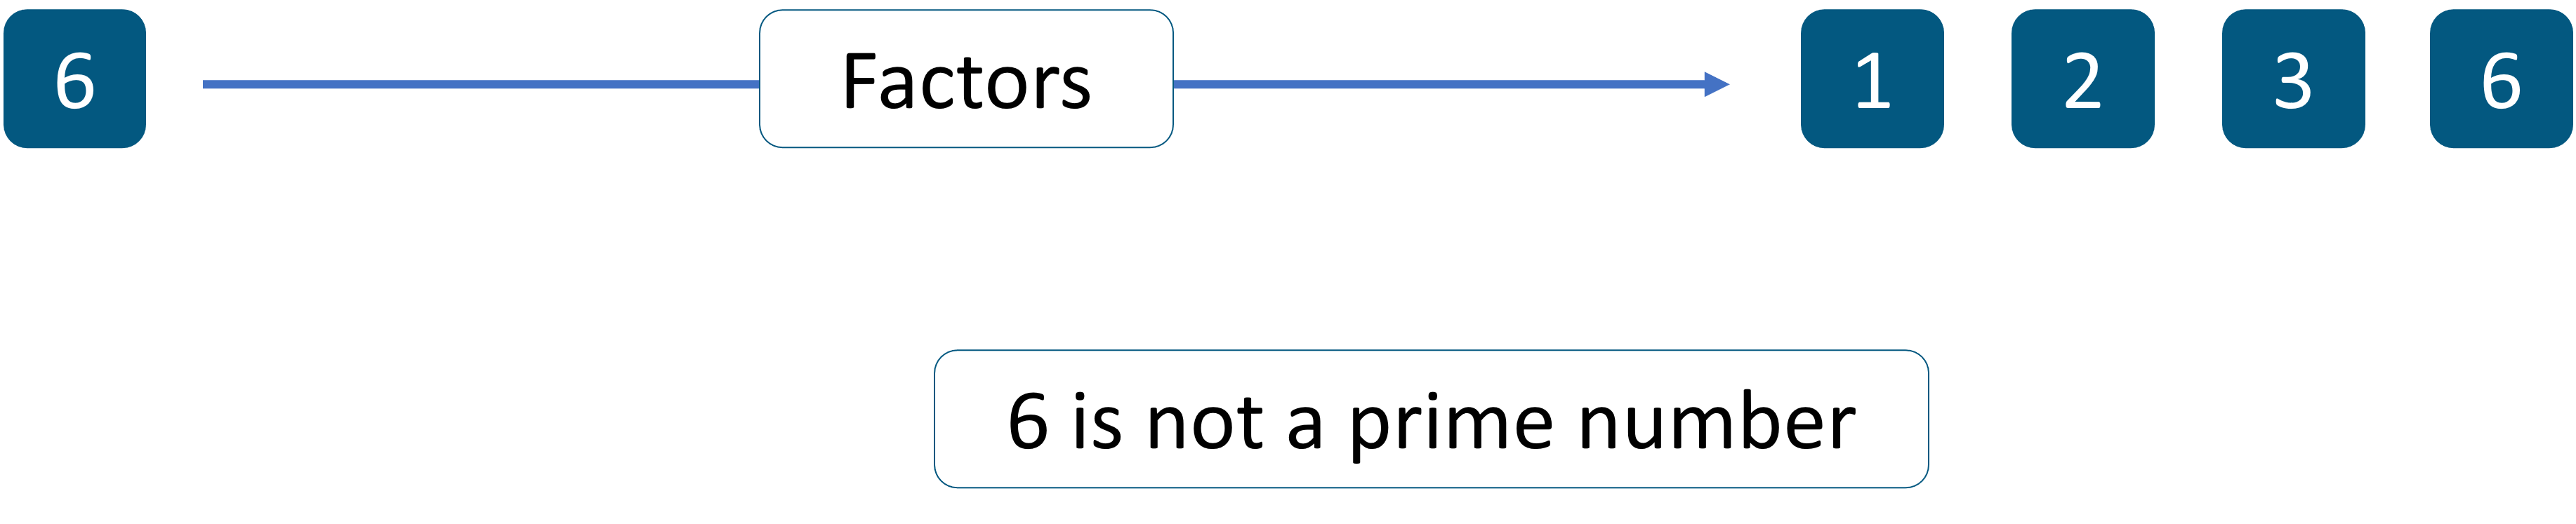 6 is not Prime Number